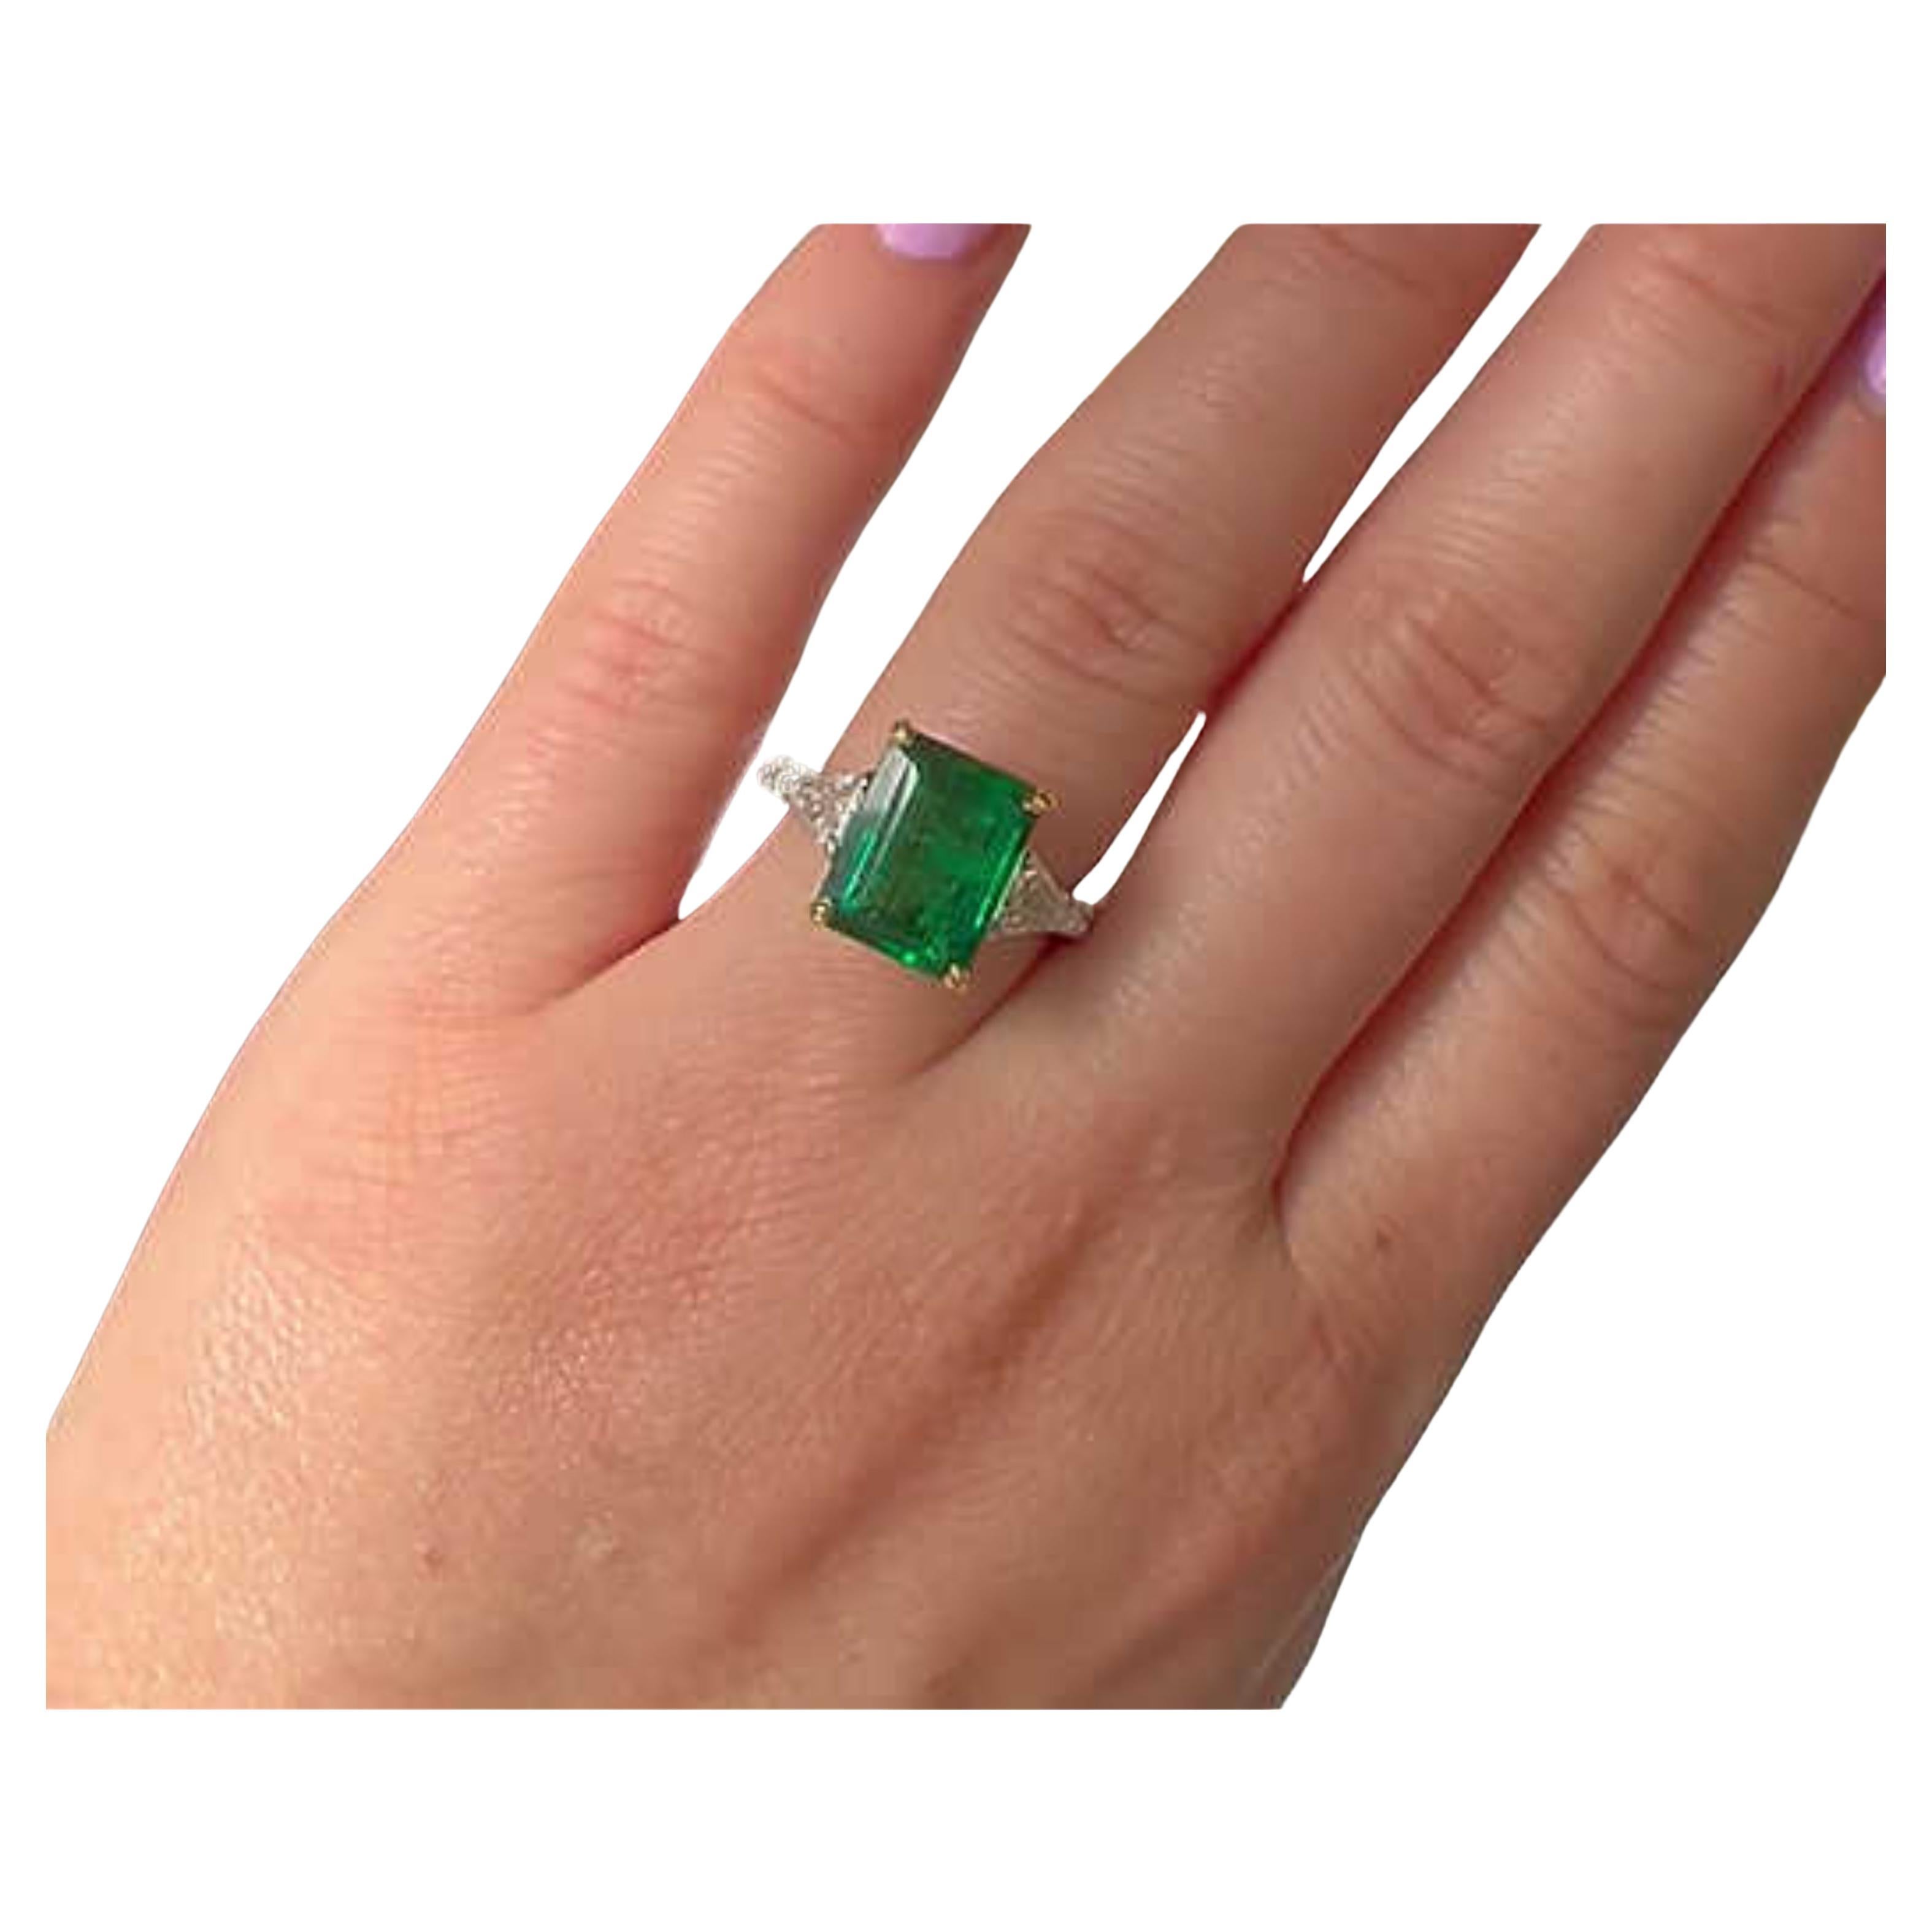 For Sale:  5 Carat Natural Emerald Diamond Engagement Ring Set in 18K Gold, Cocktail Ring 4